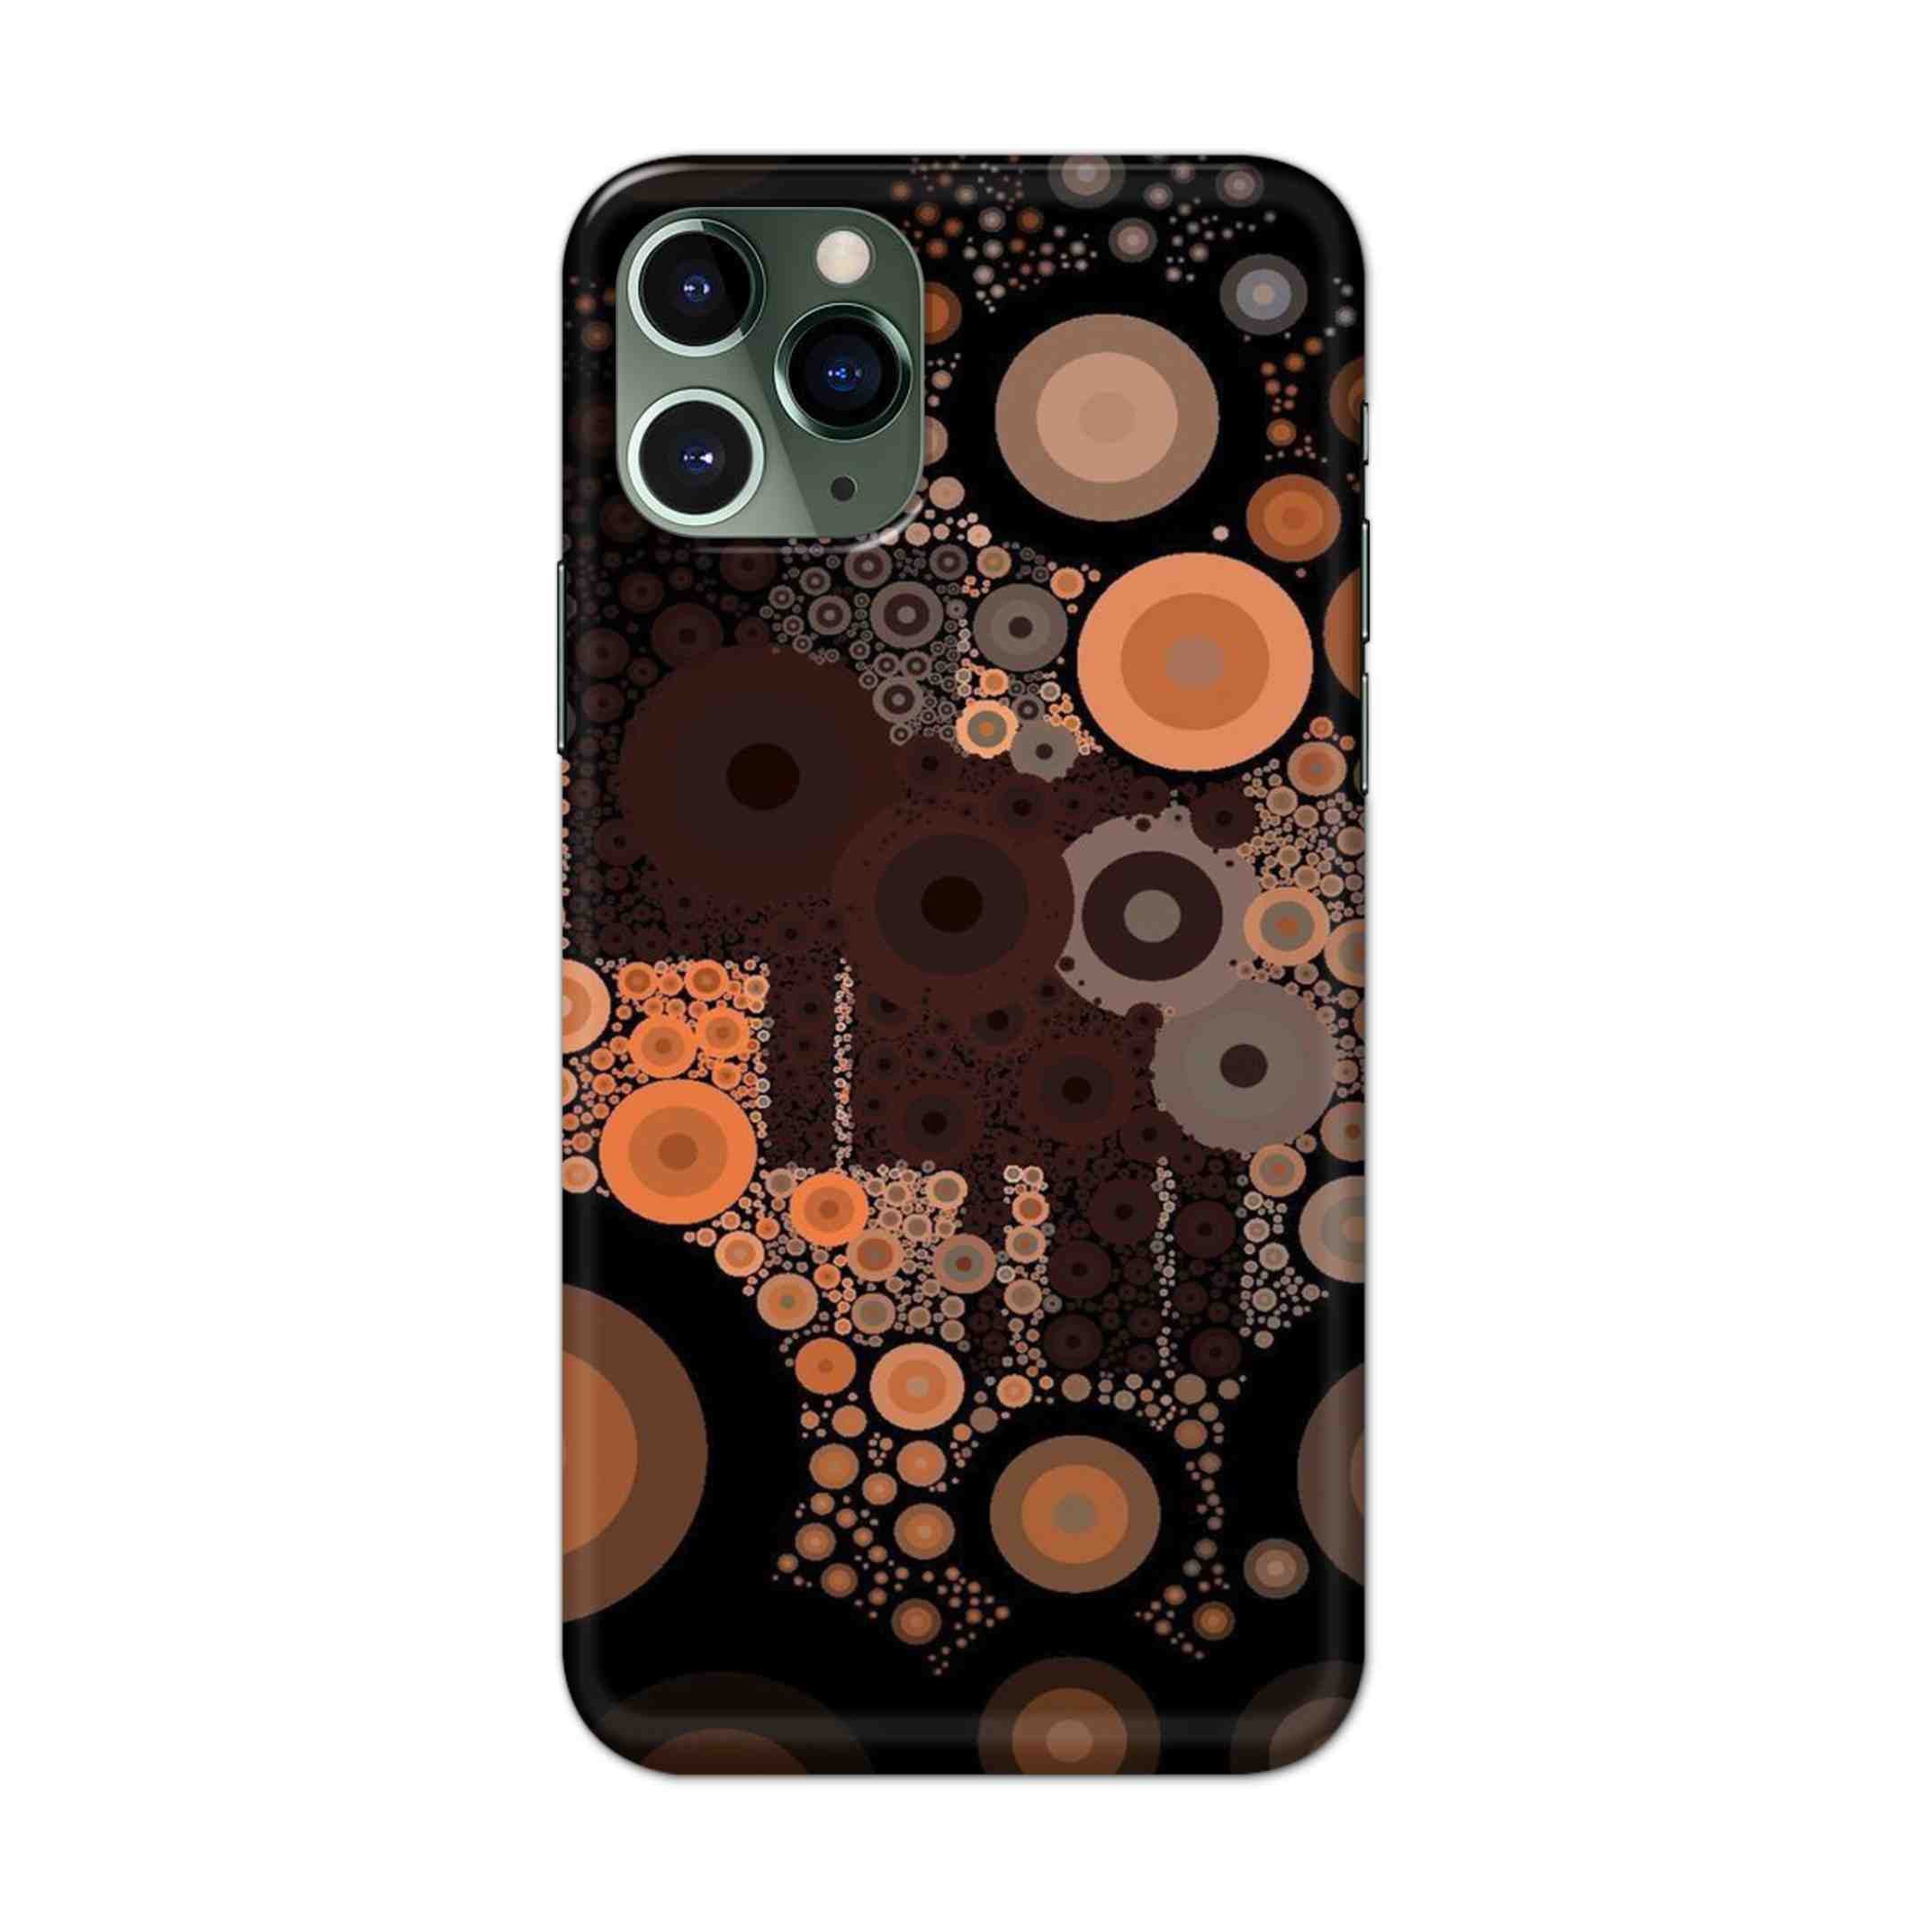 Buy Golden Circle Hard Back Mobile Phone Case/Cover For iPhone 11 Pro Online